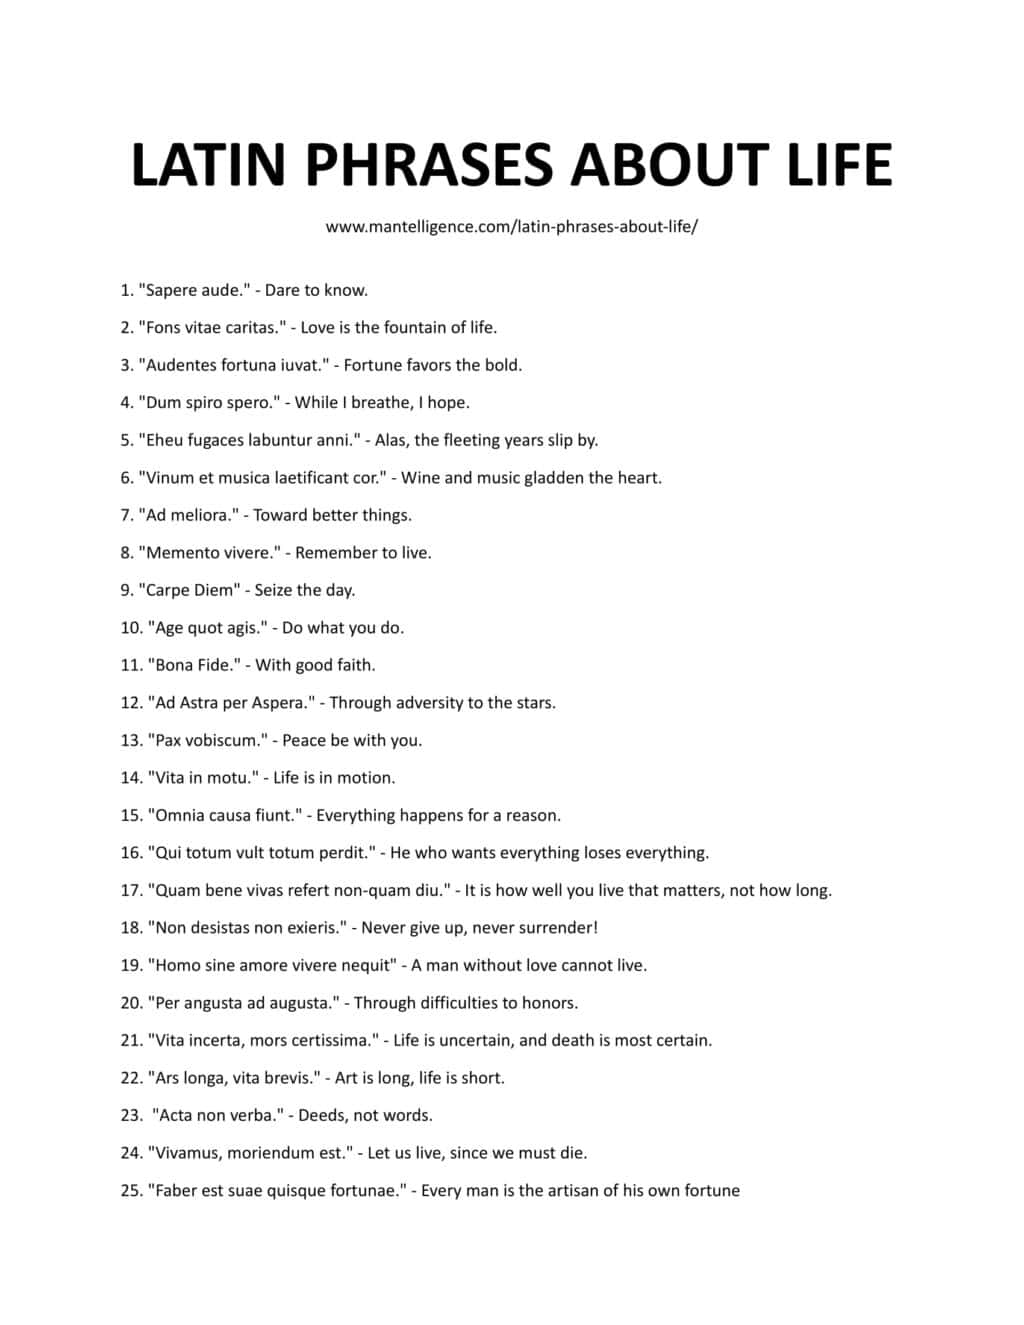 Downloadable and printable list of phrases